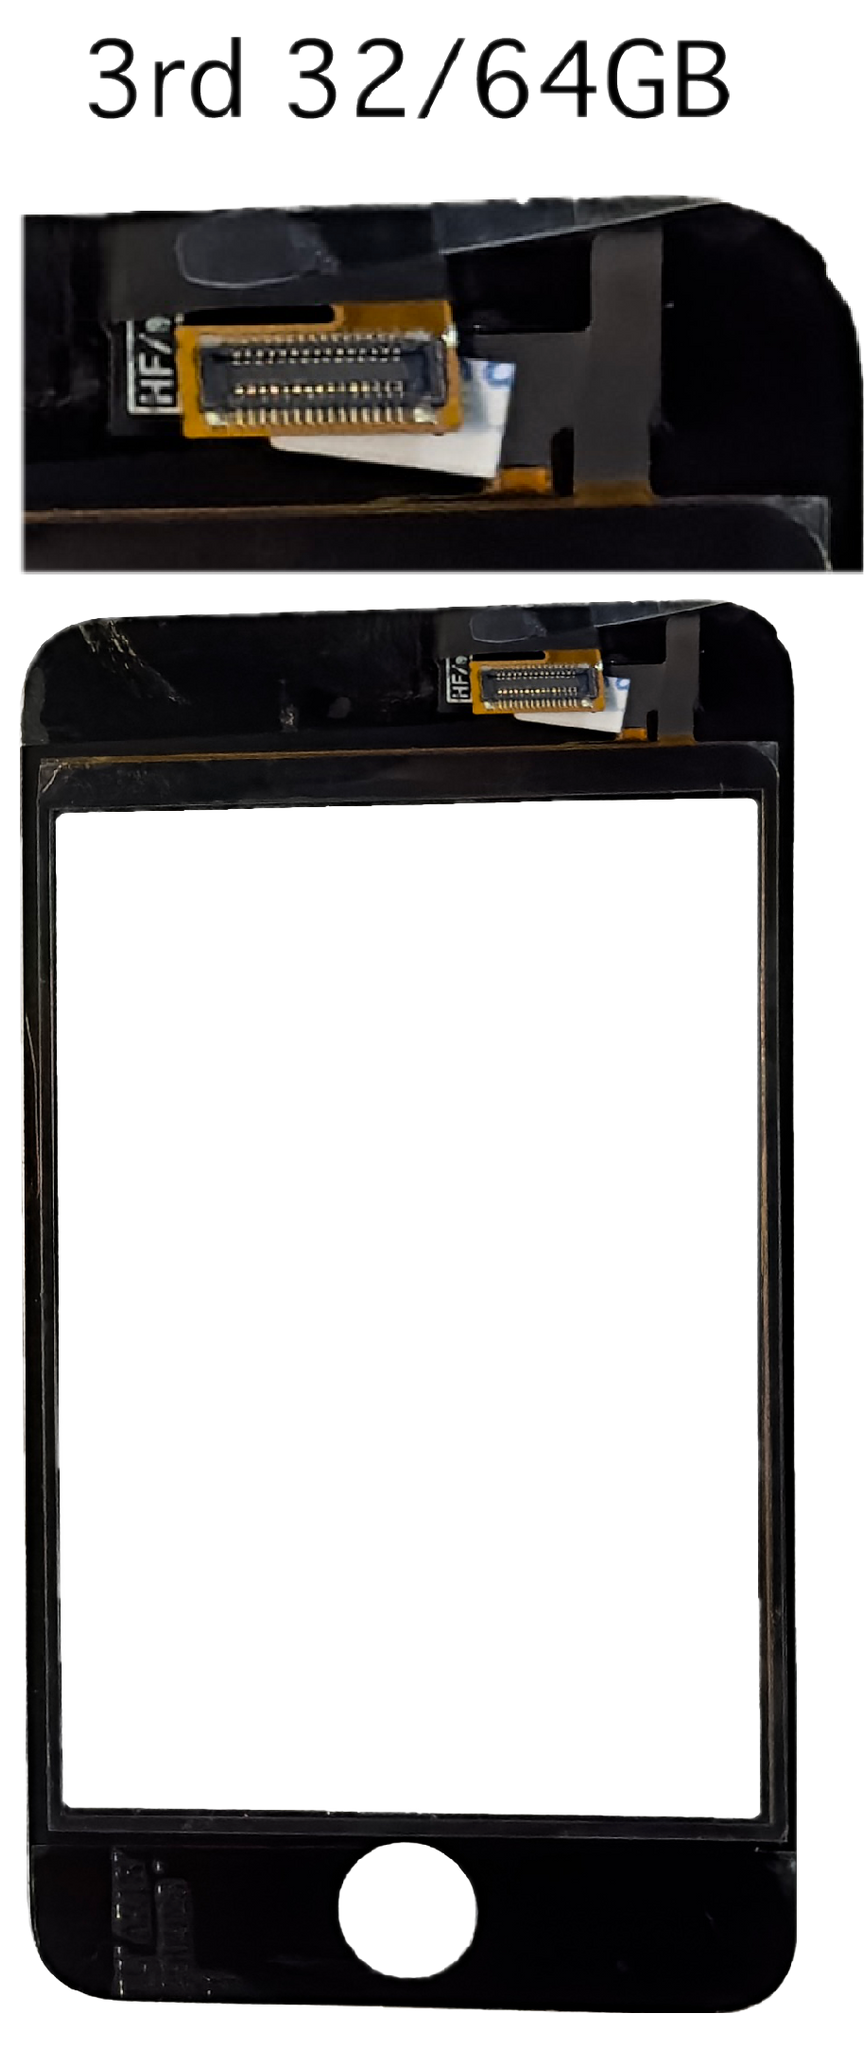 New Black Digitizer Front Glass Touchscreen for Apple iPod Touch 3rd Generation A1318 32GB 64GB